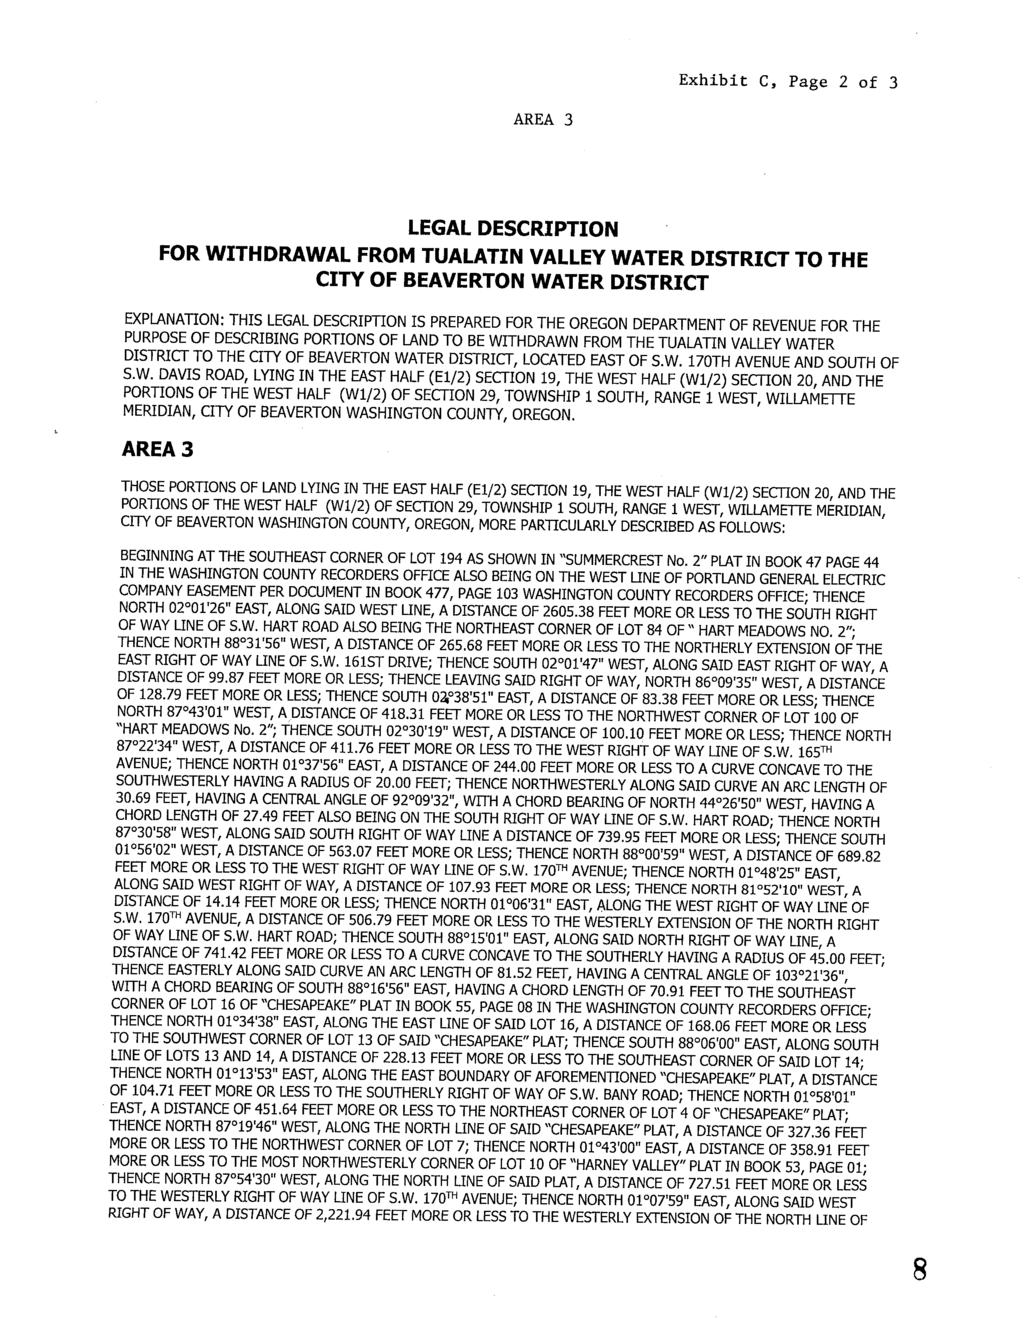 Exhibit C, Page 2 of 3 AREA 3 LEGAL DESCRIPTION FOR WITHDRAWAL FROM TUALATIN VALLEY WATER DISTRICT TO THE CITY OF BEAVERTON WATER DISTRICT EXPLANATION: THIS LEGAL DESCRIPTION IS PREPARED FOR THE